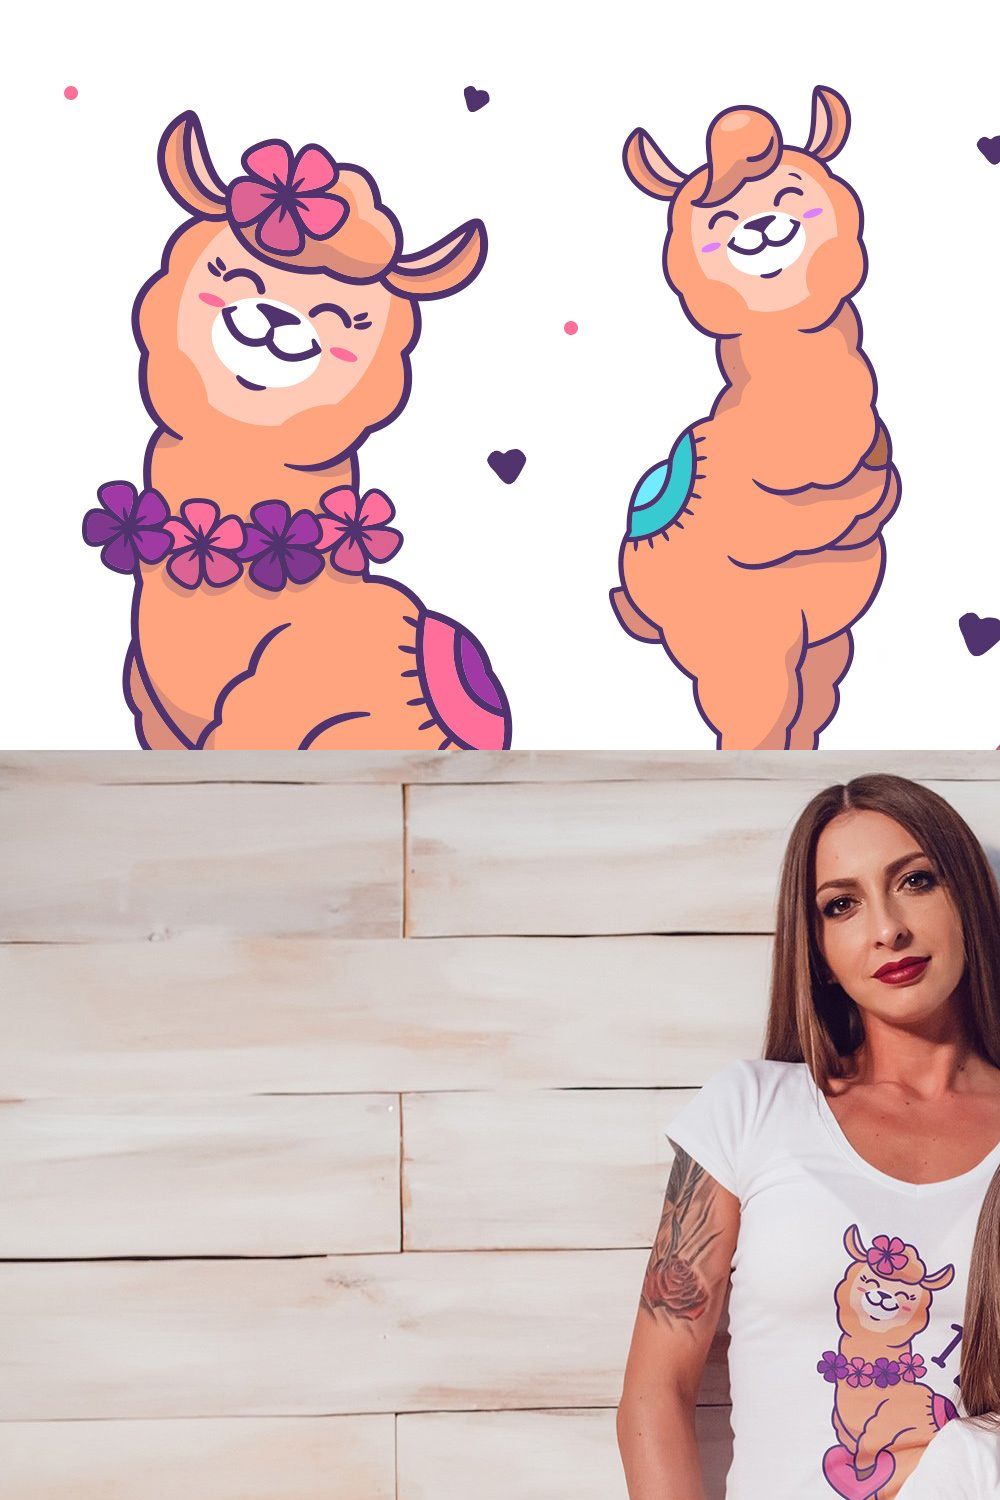 Llama loves you. Apparel designs pinterest preview image.